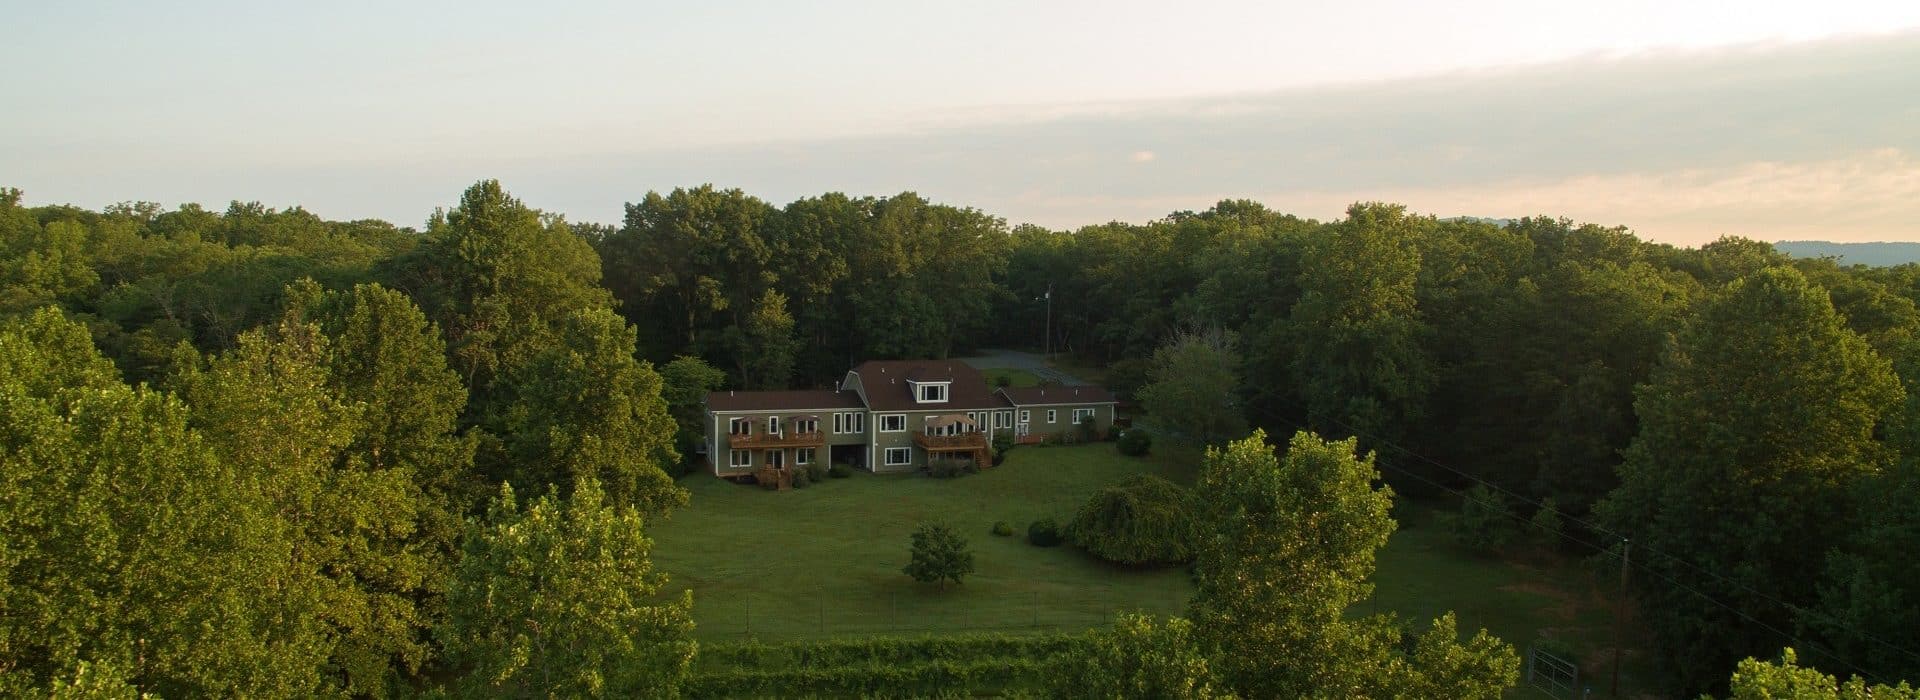 Aerial view of a large home nestled in dense trees with expansive lawn and vineyard